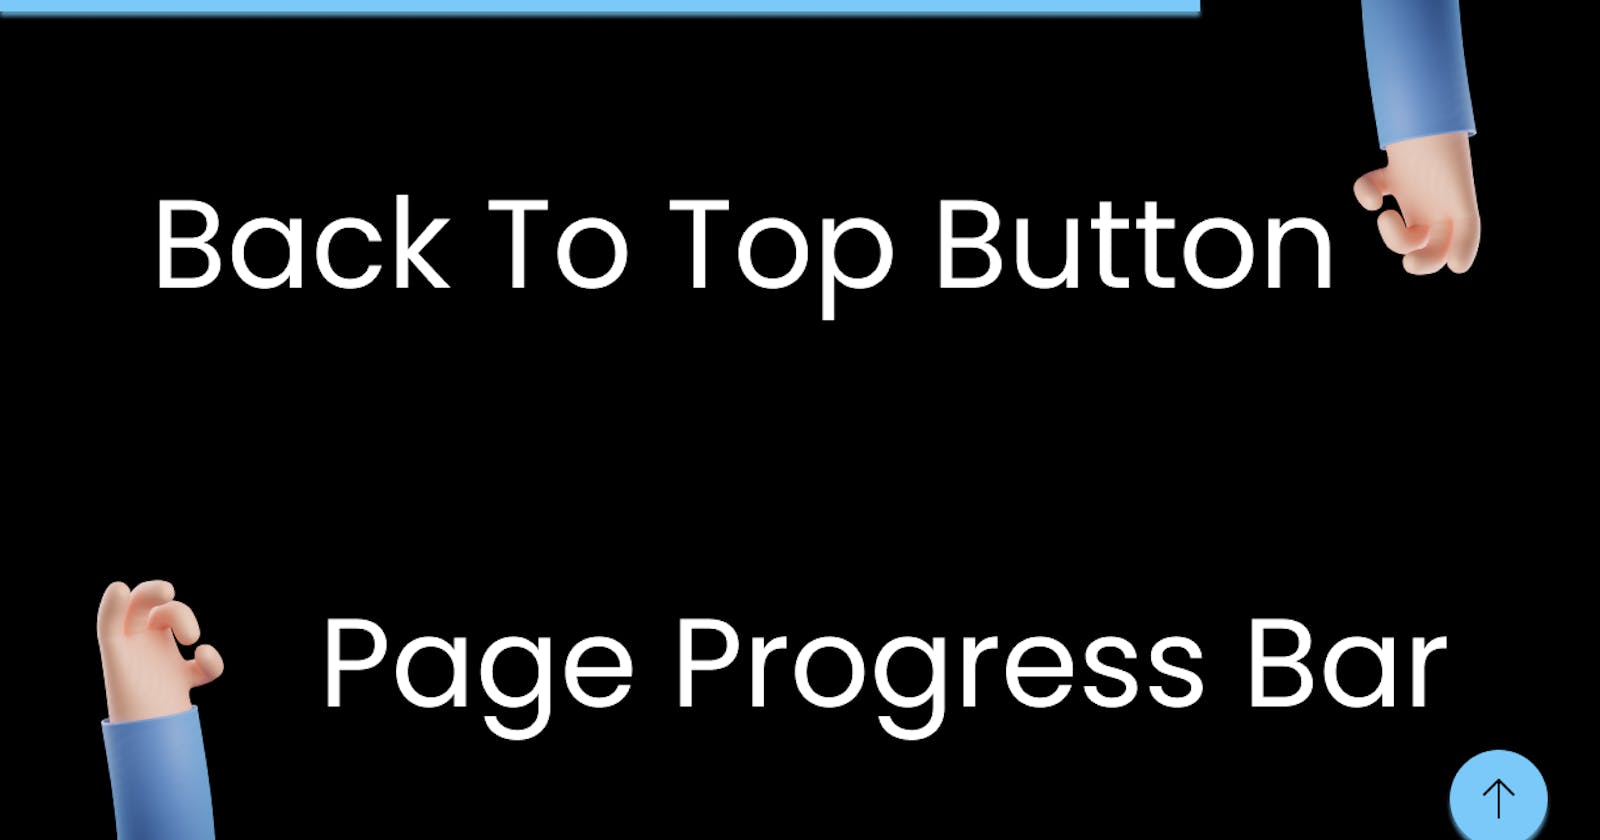 How to Make a Back to Top Button and Page Progress Bar with HTML, CSS, and JavaScript